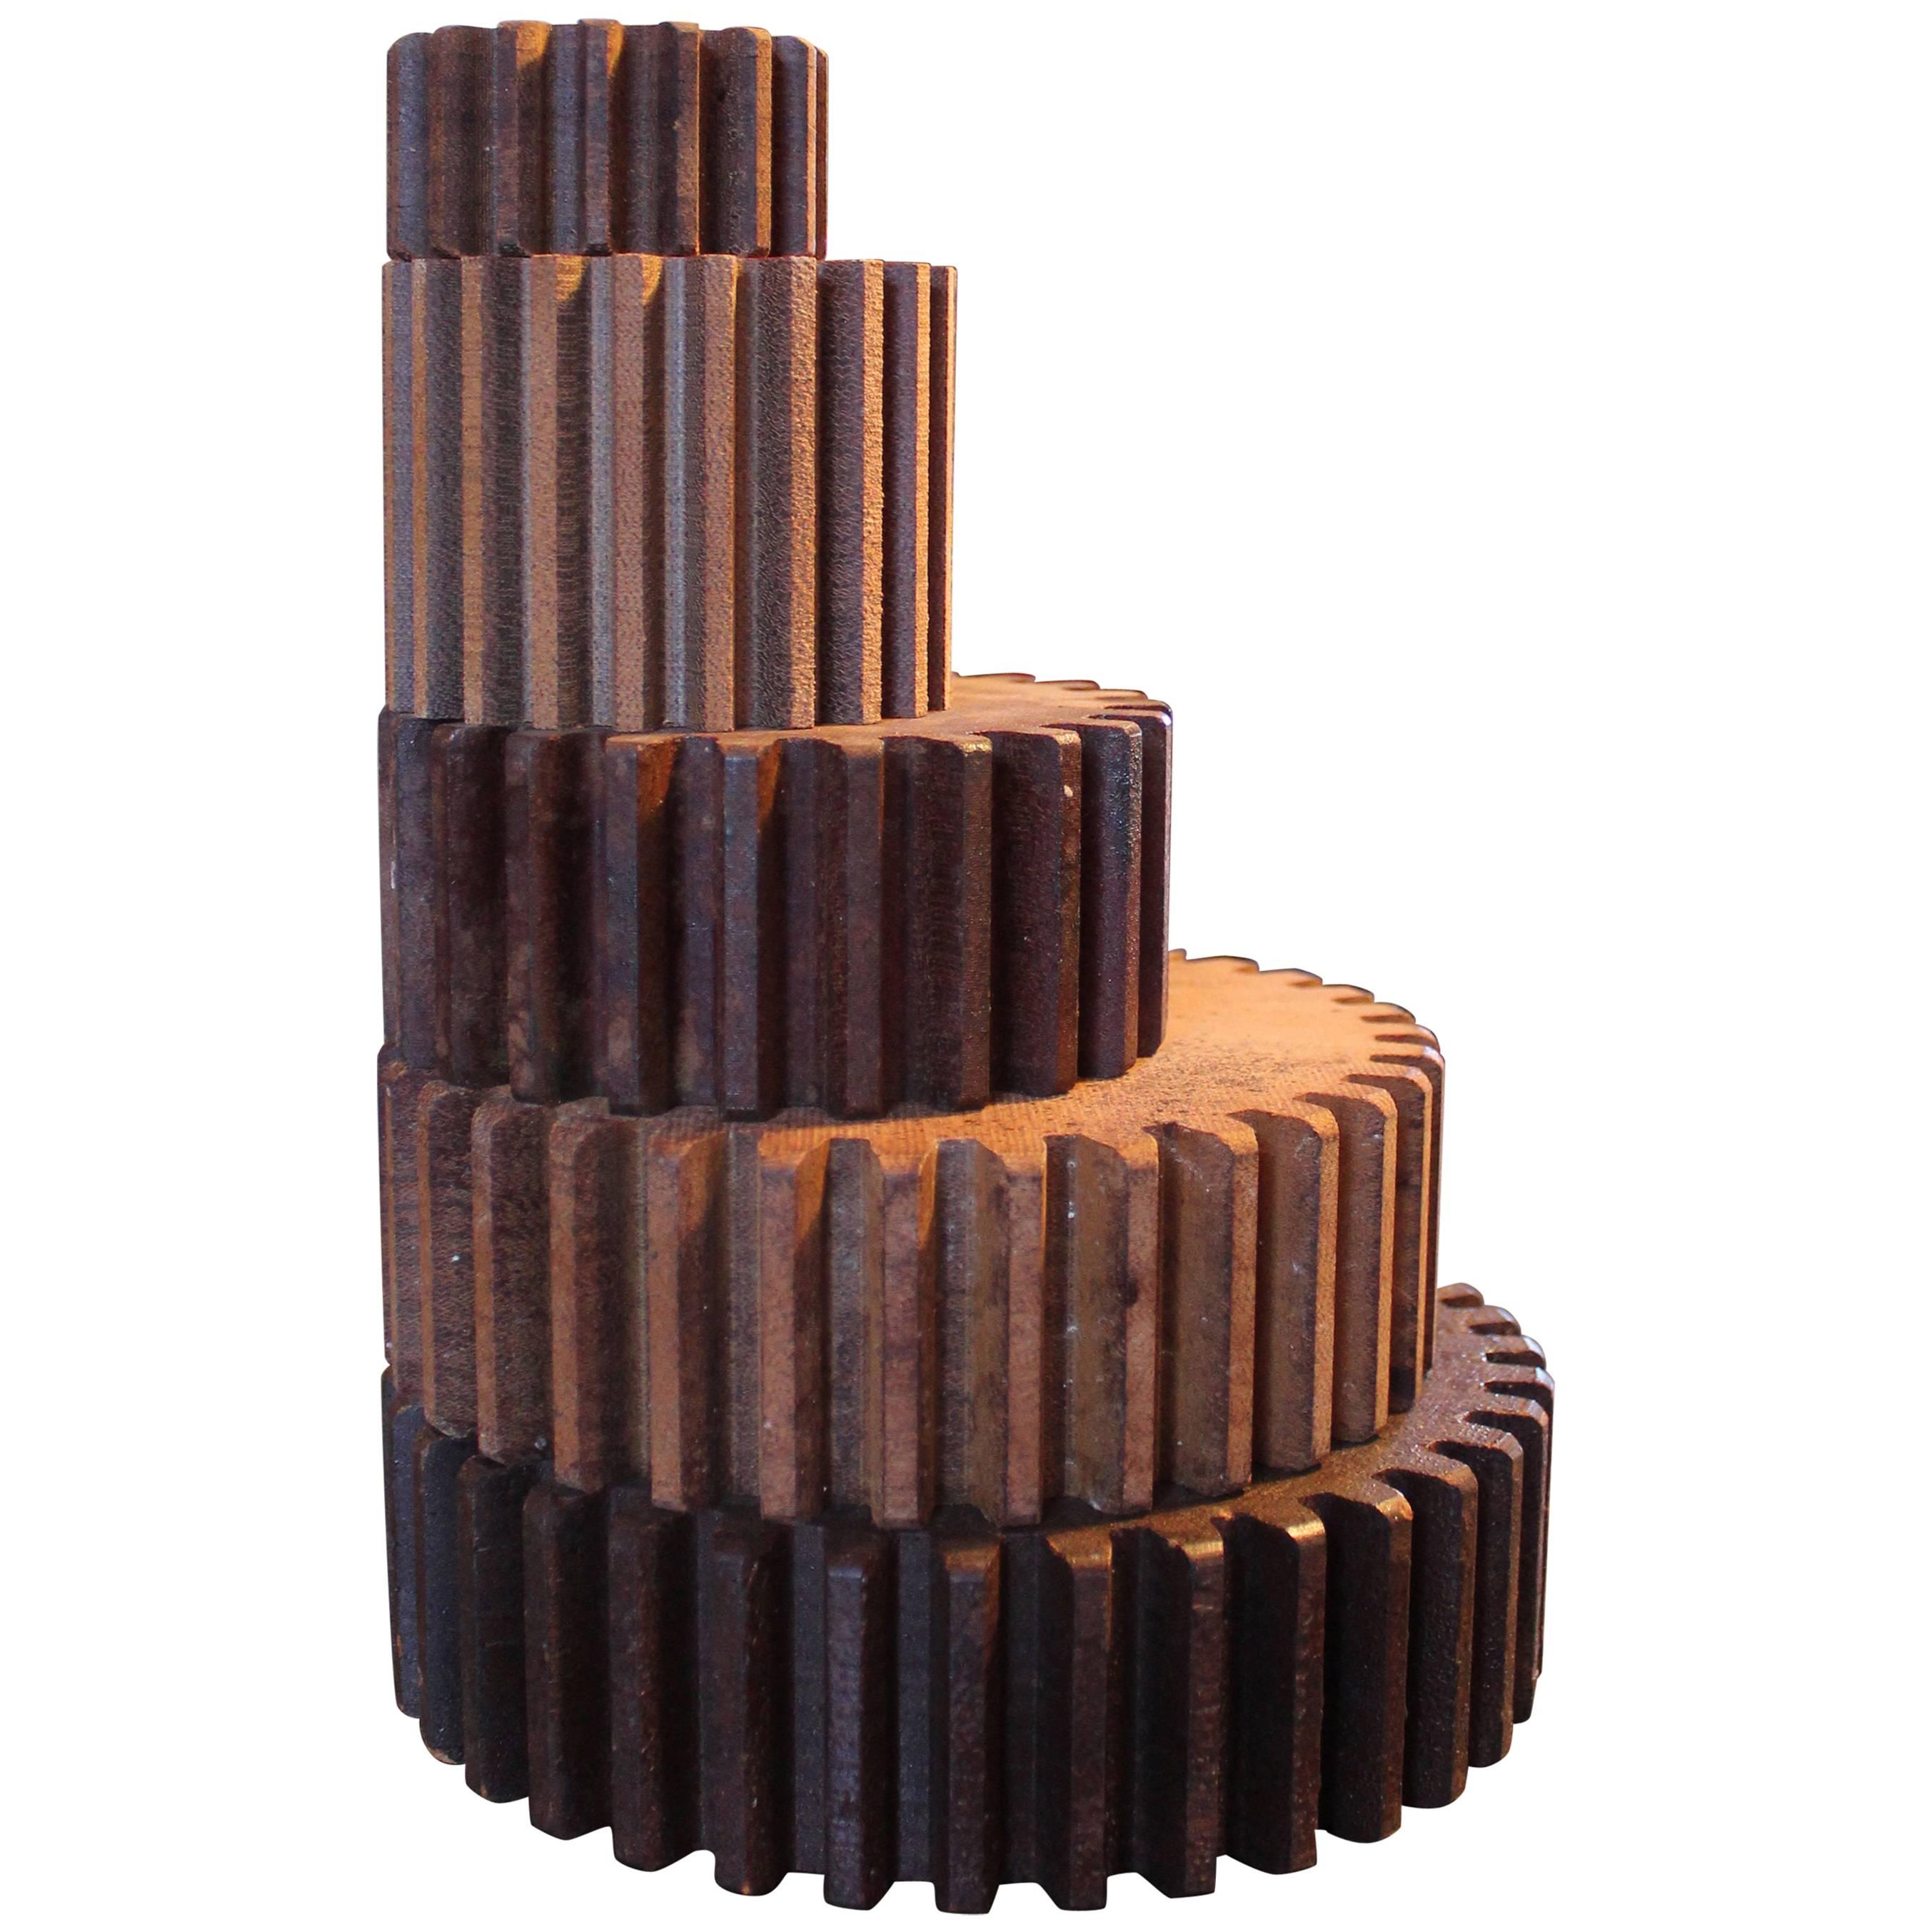 Leaning Tower of Vintage Industrial V2 Wood Gear Molds Candle Holder, Stand